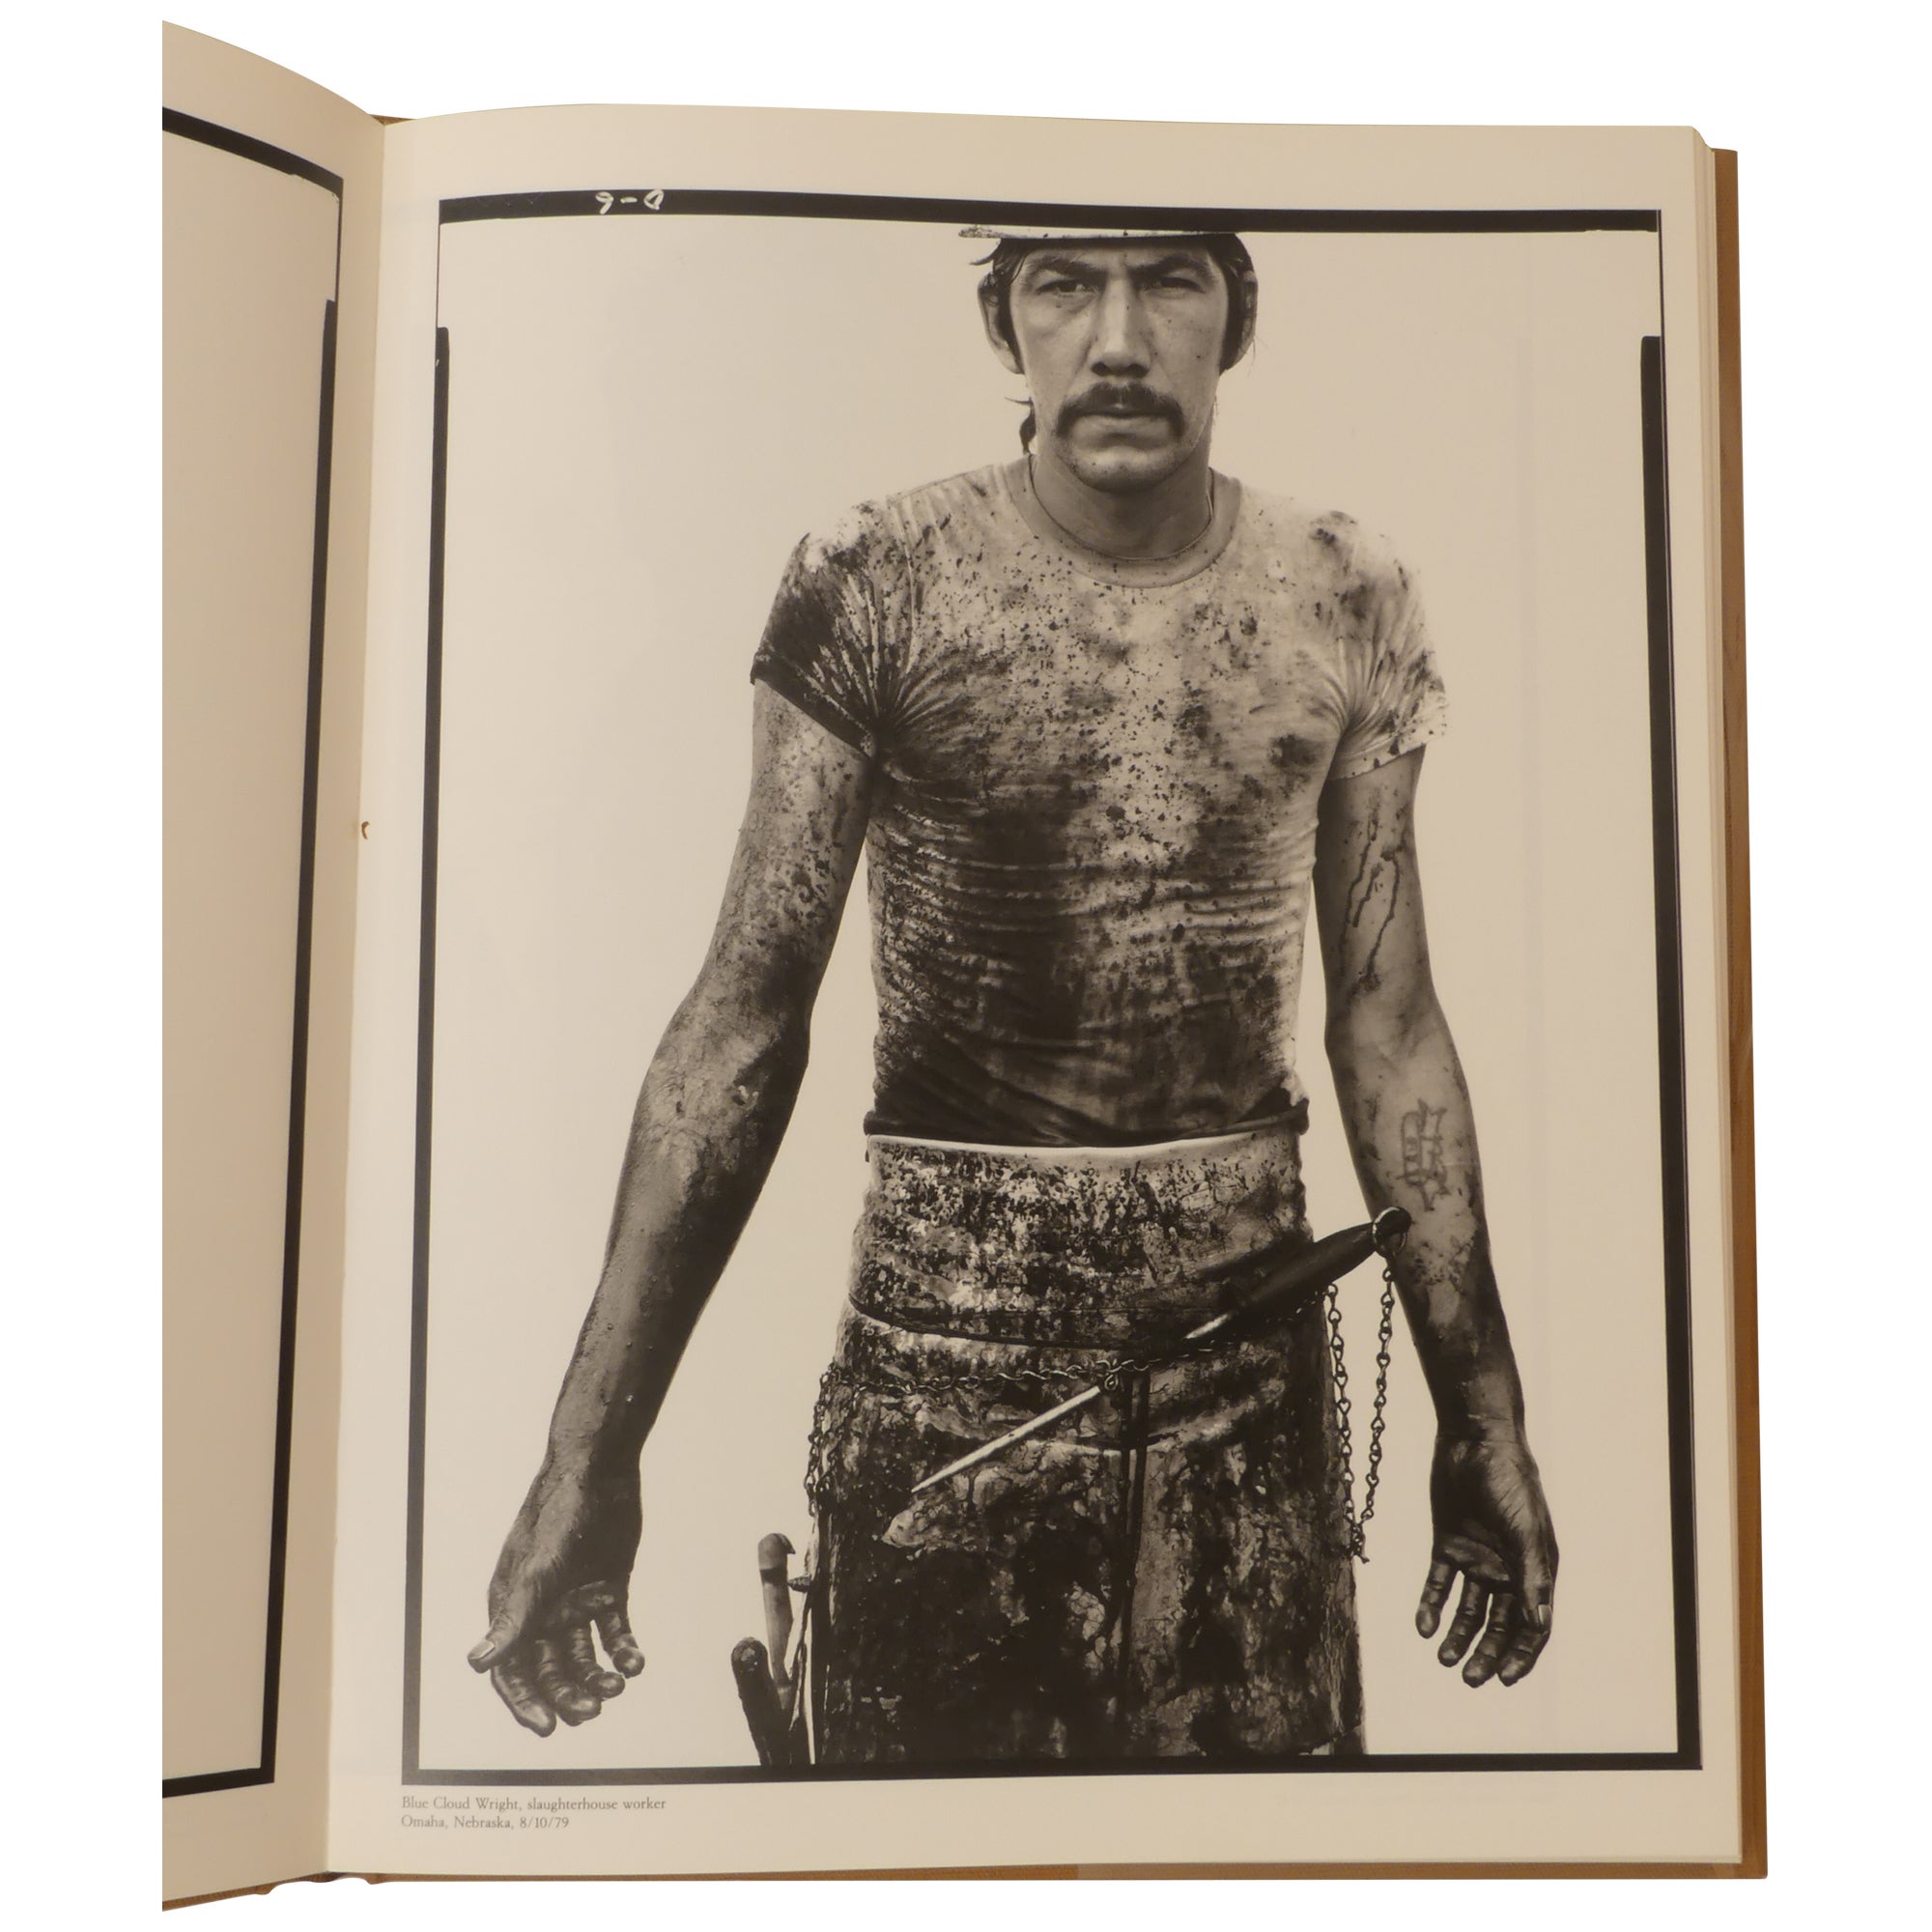 In the American West by Richard Avedon on Downtown Brown Books